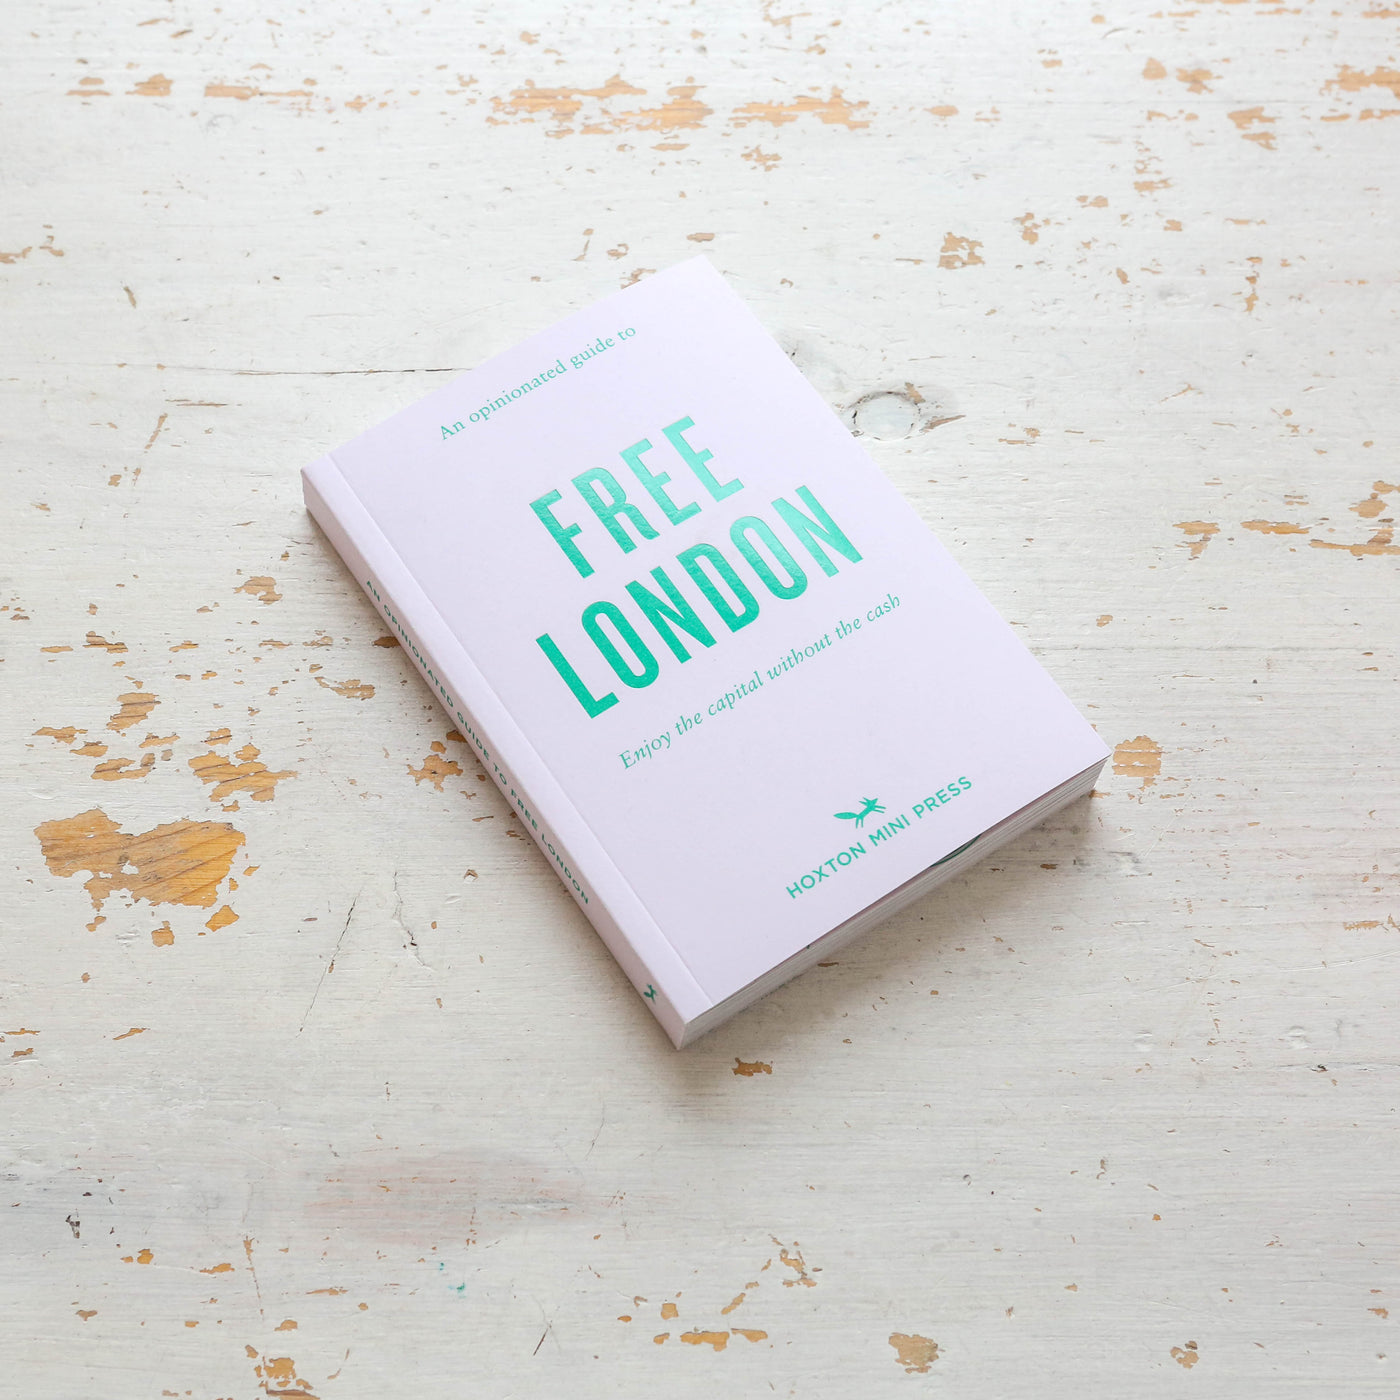 Free London - An Opinionated Guide